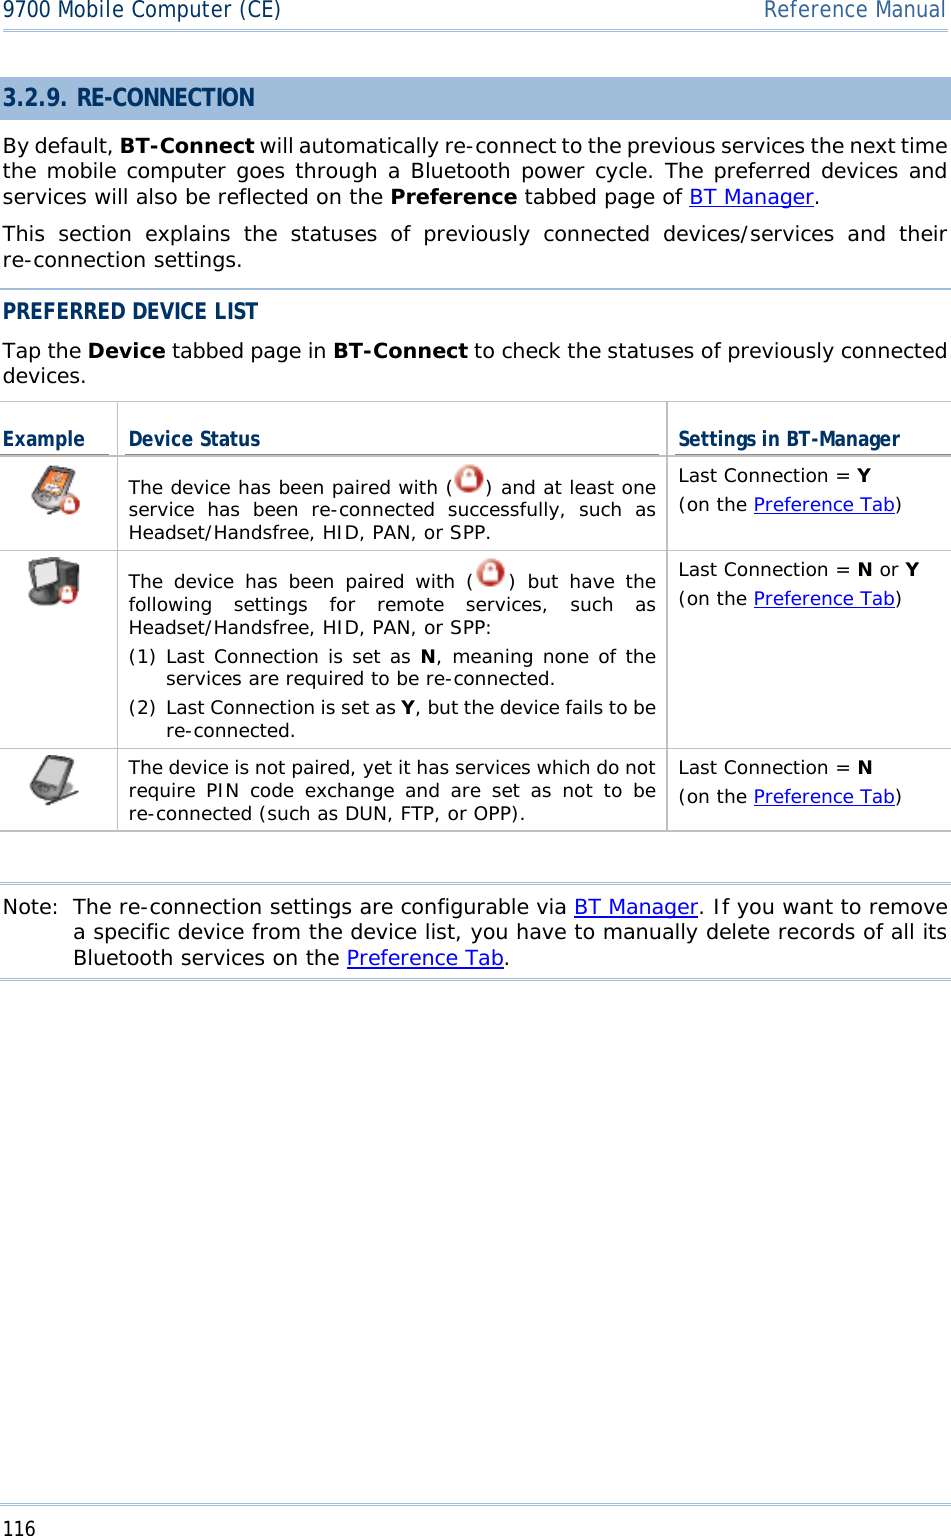 1169700 Mobile Computer (CE)  Reference Manual3.2.9. RE-CONNECTION  By default, BT-Connect will automatically re-connect to the previous services the next time the mobile computer goes through a Bluetooth power cycle. The preferred devices and services will also be reflected on the Preference tabbed page of BT Manager.This section explains the statuses of previously connected devices/services and their re-connection settings.  PREFERRED DEVICE LIST Tap the Device tabbed page in BT-Connect to check the statuses of previously connected devices.Example Device Status  Settings in BT-Manager The device has been paired with ( ) and at least one service has been re-connected successfully, such as Headset/Handsfree, HID, PAN, or SPP. Last Connection = Y(on the Preference Tab)The device has been paired with ( ) but have the following settings for remote services, such as Headset/Handsfree, HID, PAN, or SPP: (1) Last Connection is set as N, meaning none of the services are required to be re-connected. (2) Last Connection is set as Y, but the device fails to be re-connected.Last Connection = Nor Y(on the Preference Tab)The device is not paired, yet it has services which do not require PIN code exchange and are set as not to be re-connected (such as DUN, FTP, or OPP). Last Connection = N(on the Preference Tab)Note:  The re-connection settings are configurable via BT Manager. If you want to remove a specific device from the device list, you have to manually delete records of all its Bluetooth services on the Preference Tab.